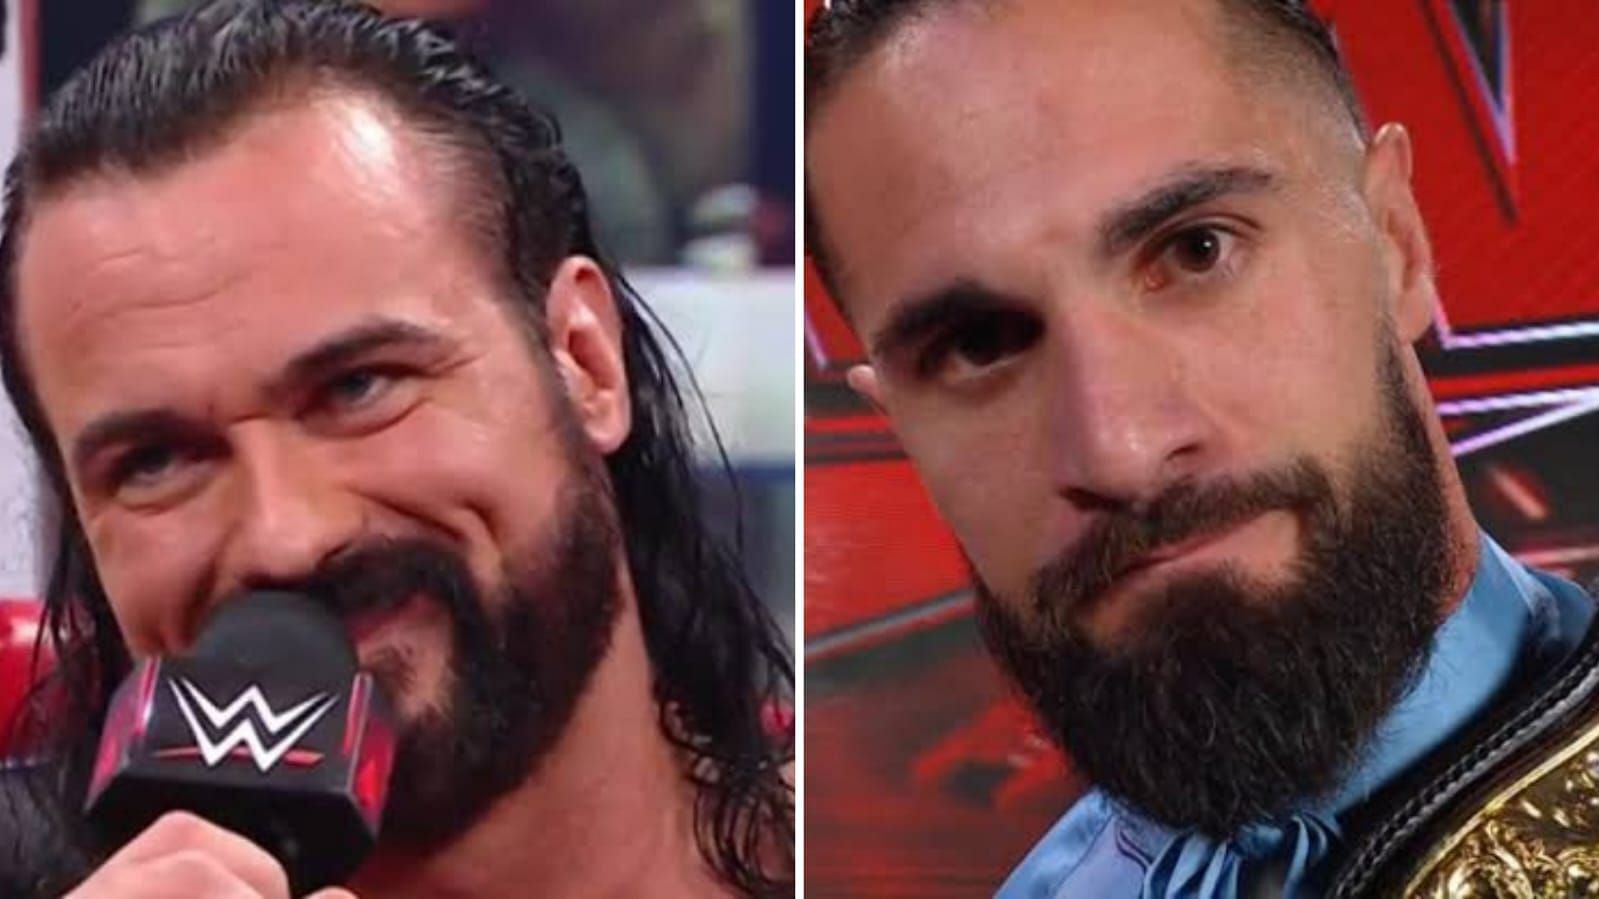 Drew McIntyre and Seth Rollins are two of WWE